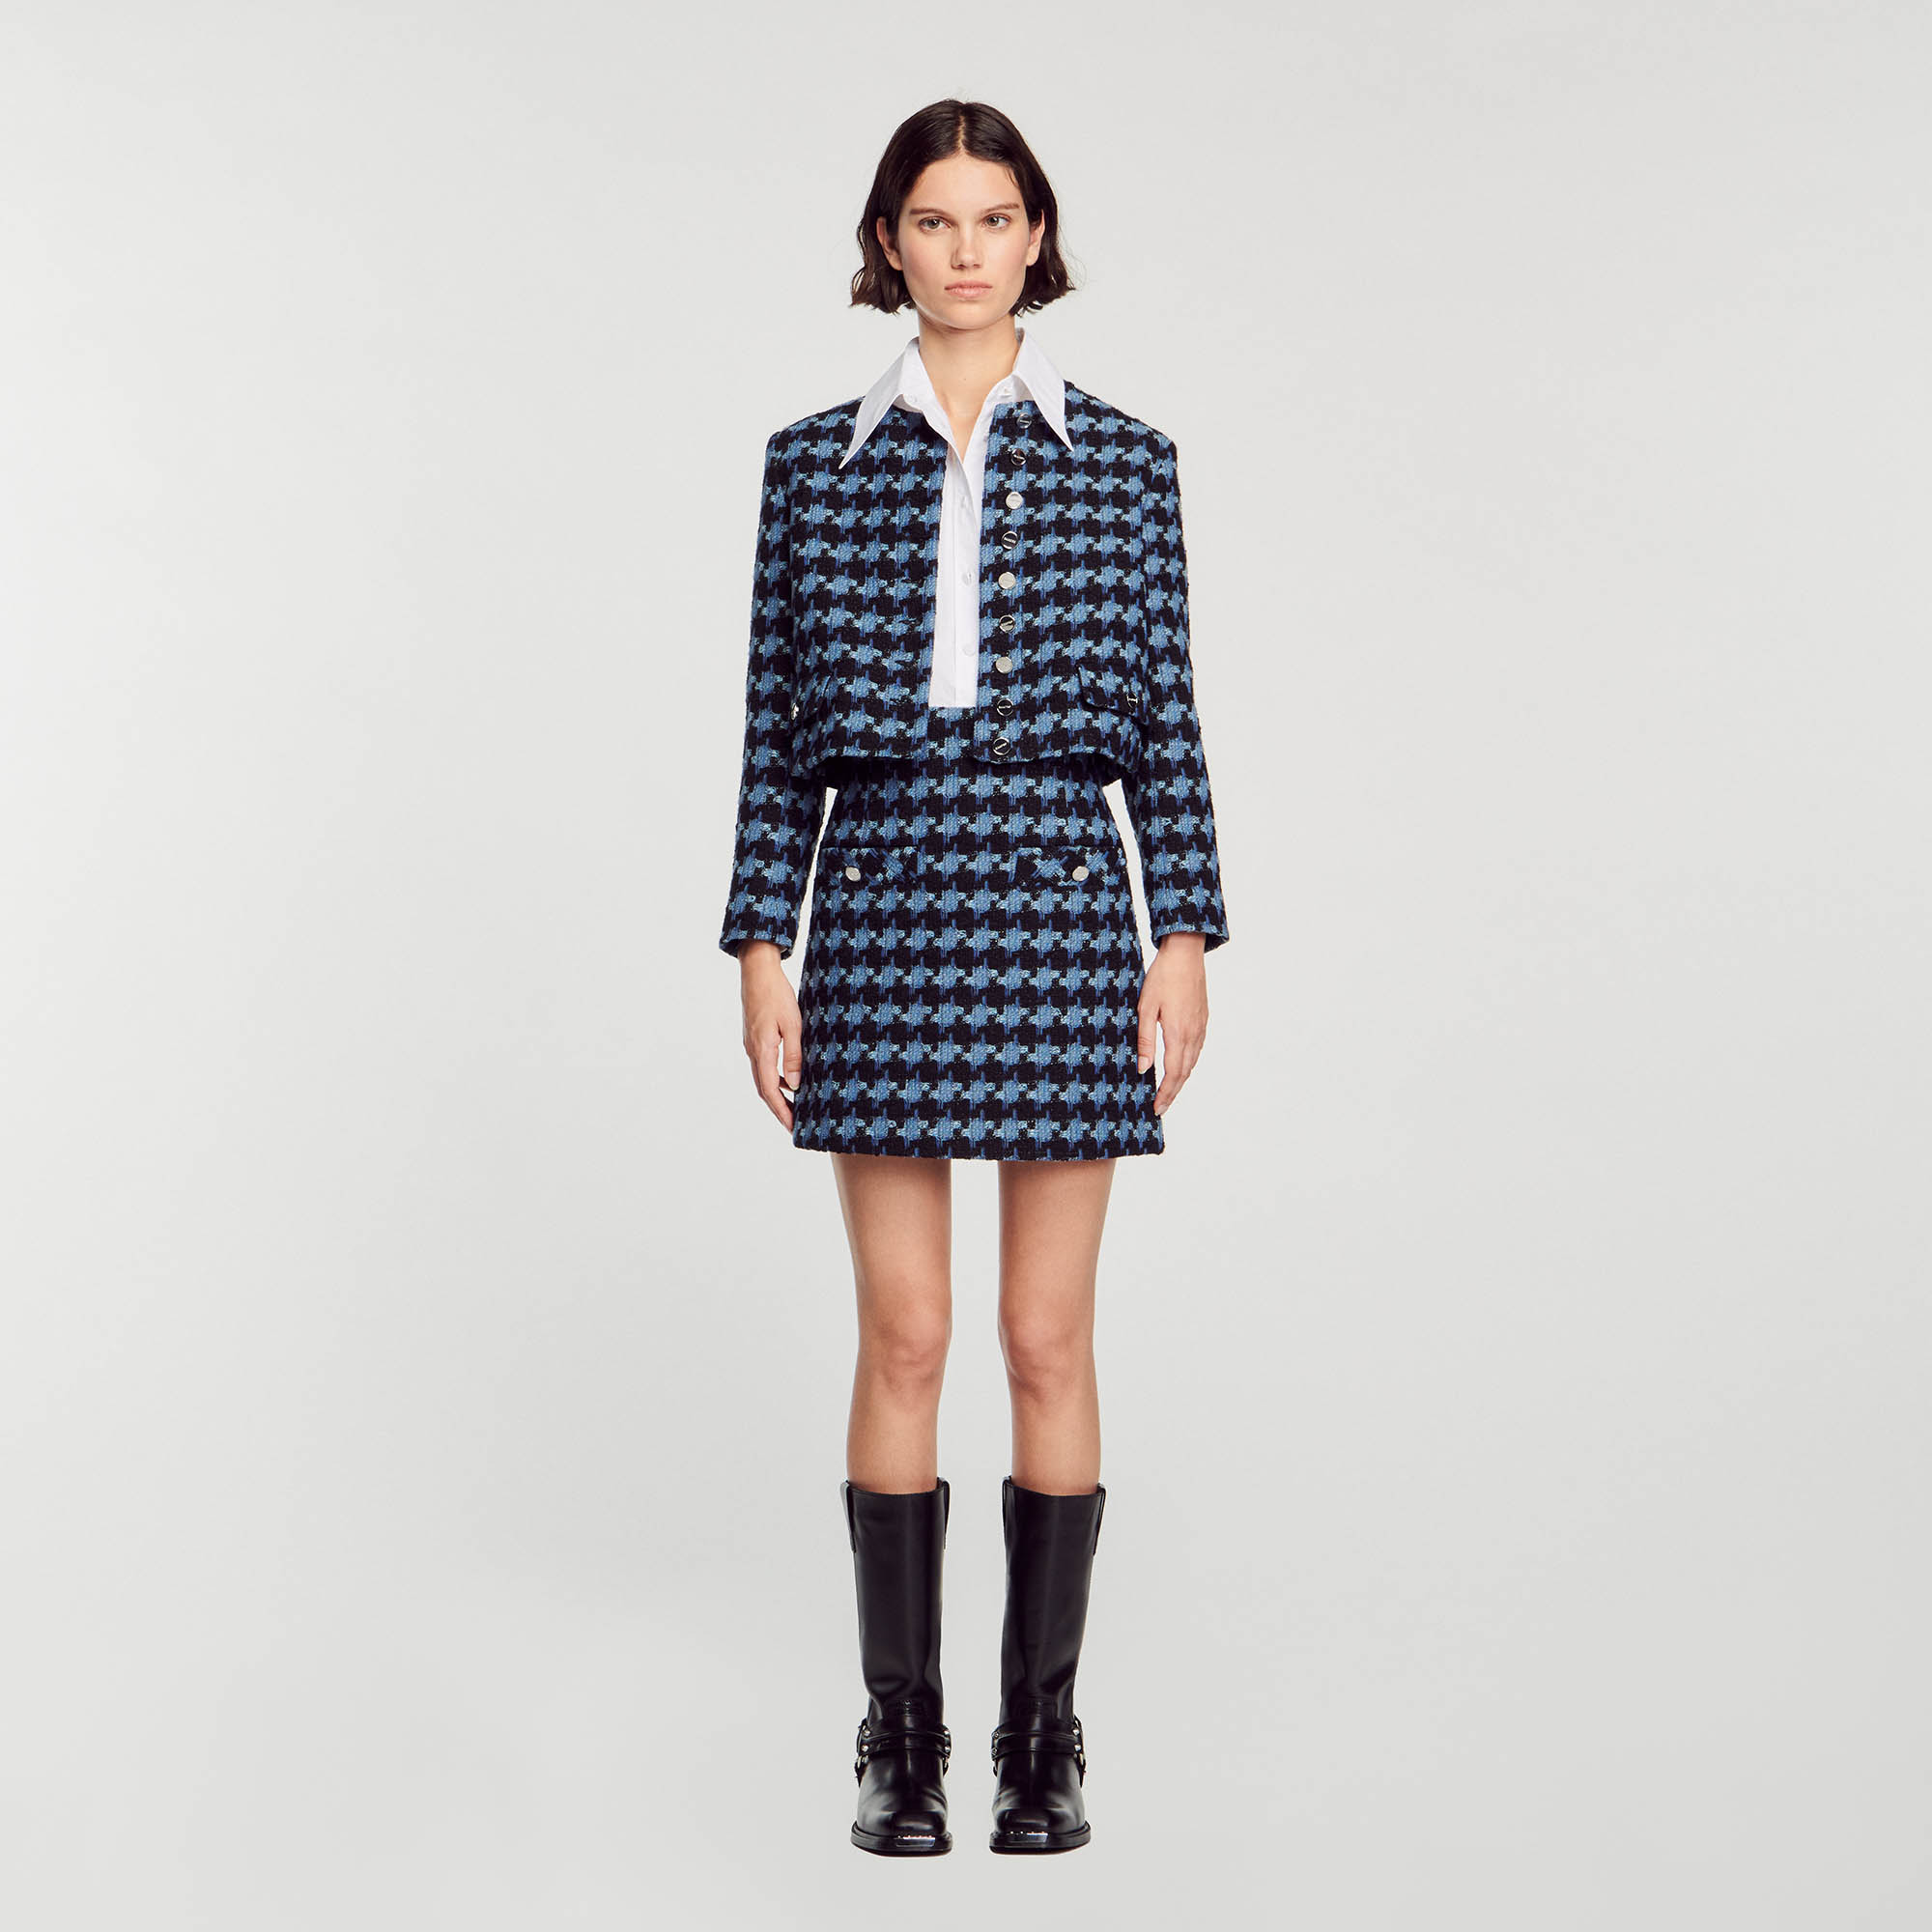 Sandro cotton Short tweed skirt with a houndstooth pattern and piped pockets with buttons on the waist Sandro Women's short tweed skirt Houndstooth pattern 2 piped pockets with buttons This skirt has a matching jacket This item's main material is at least 50% recycled